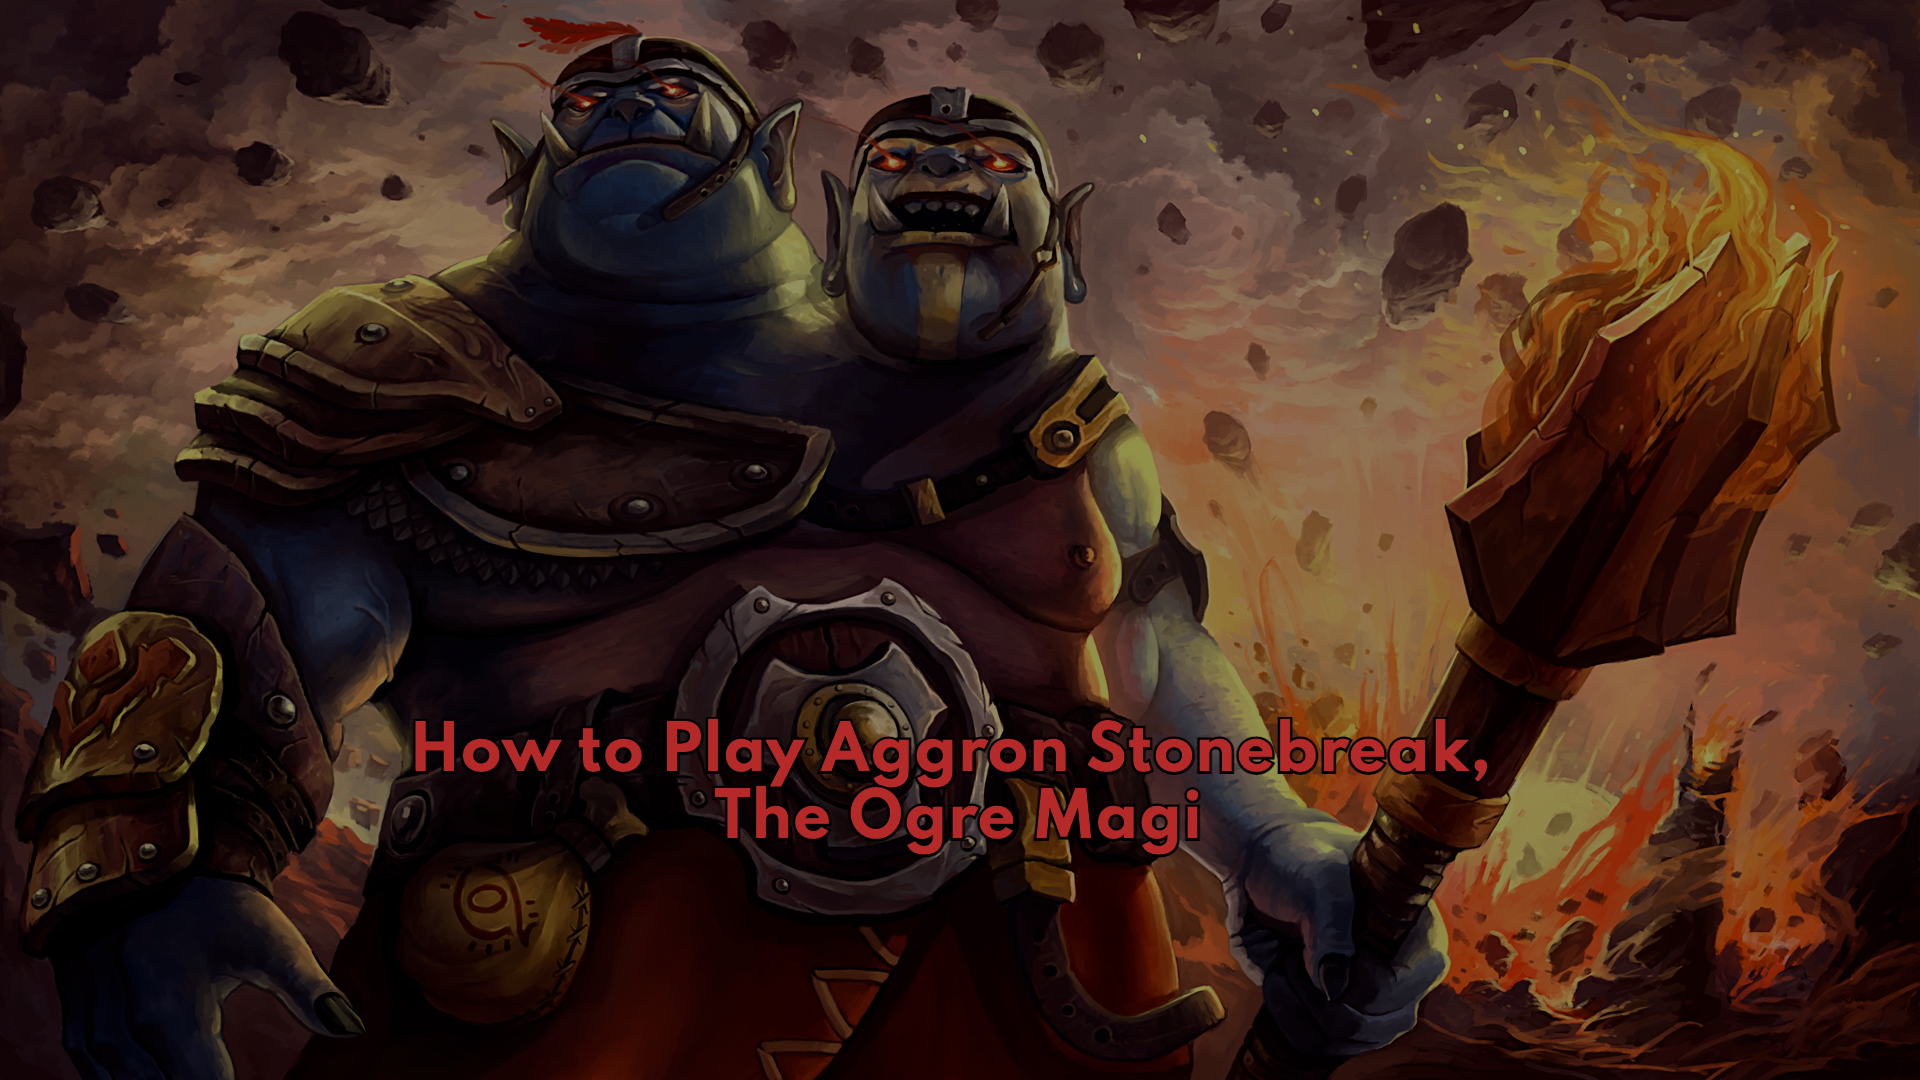 How to Play Oger Magi